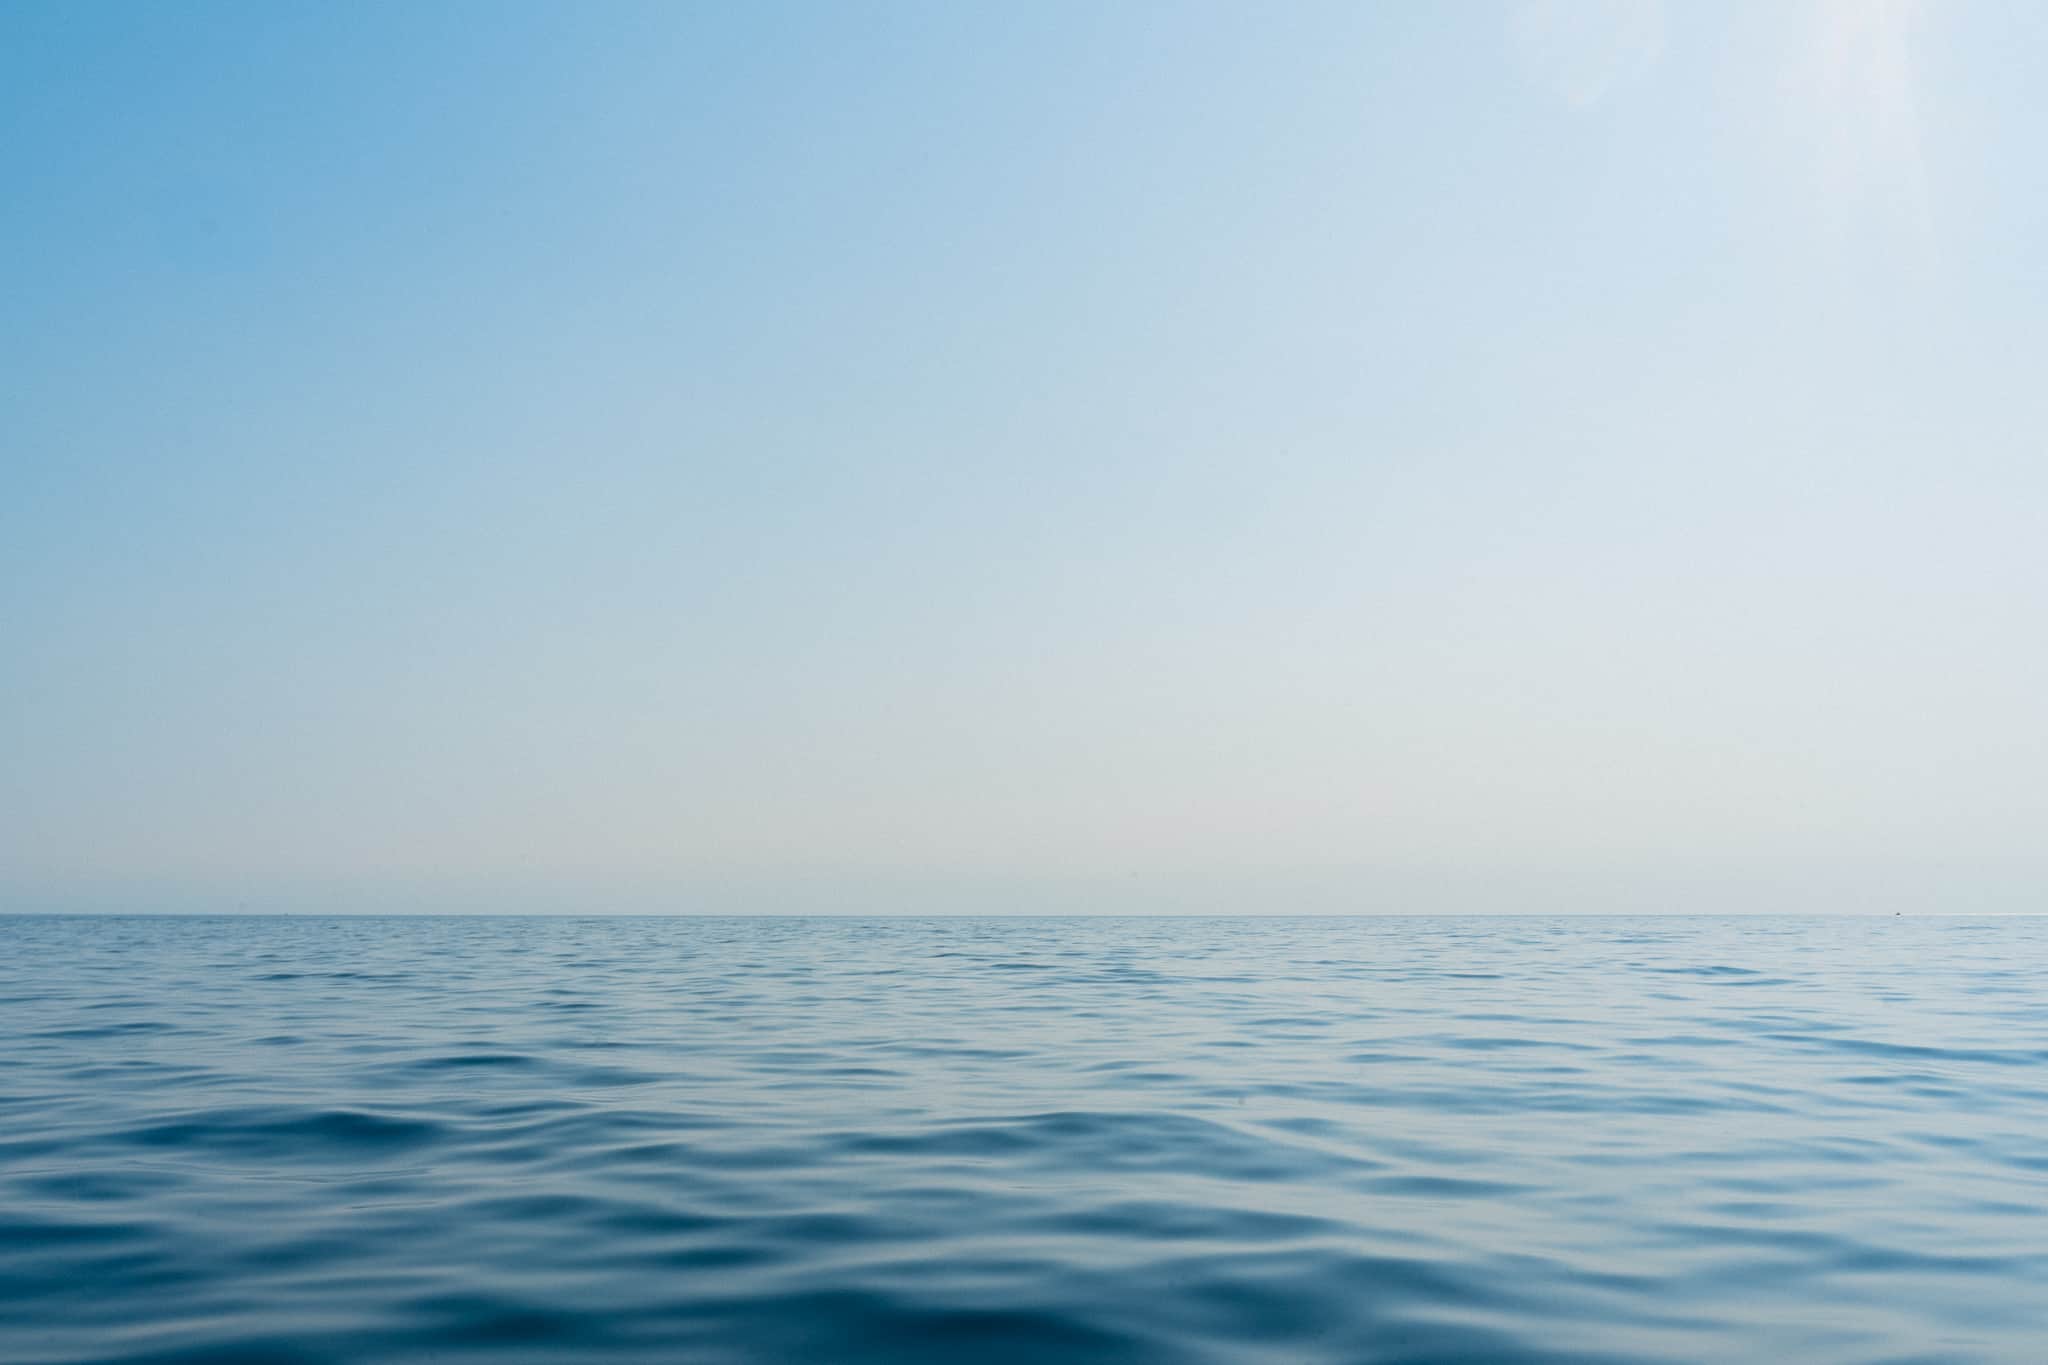 Monochromatic shot of the deep blue water in the Adriatic sea with a soft blue sky shot off the coast of Kotor Montenegro